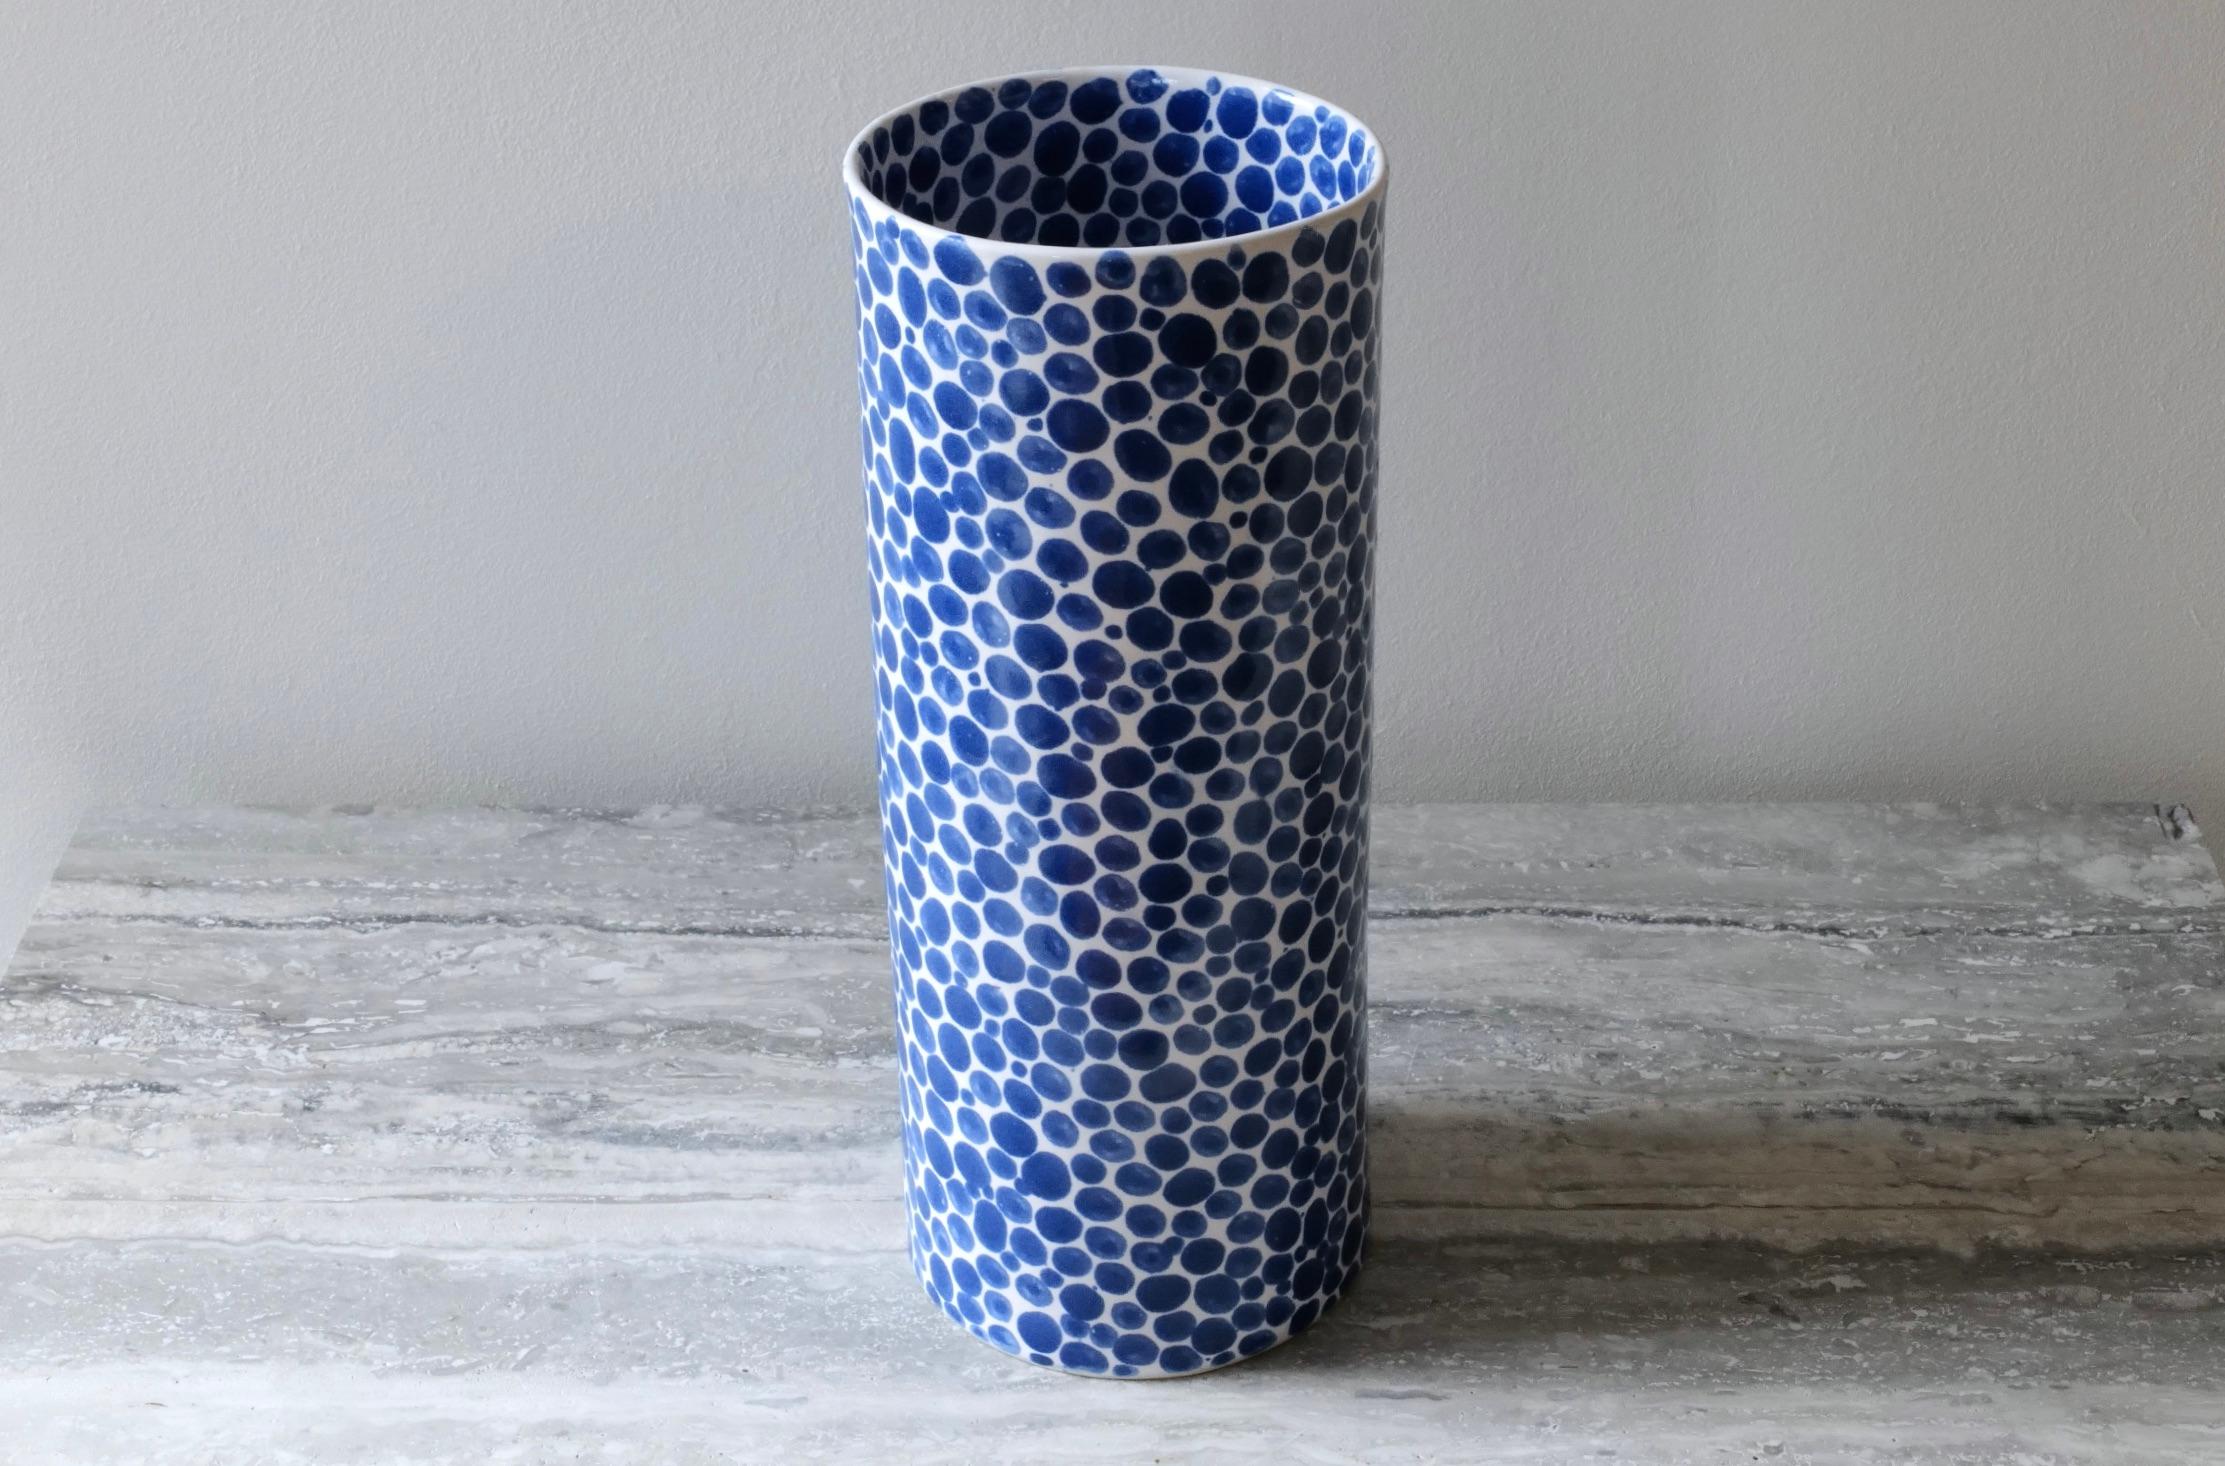 Large, tall ceramic vase. Hand-cast in porcelain and once bisque fired, each dot is hand-painted with a traditional cobalt blue glaze. An unconventional layered glazing technique, developed by the artist, is used in these cast porcelain pieces. The